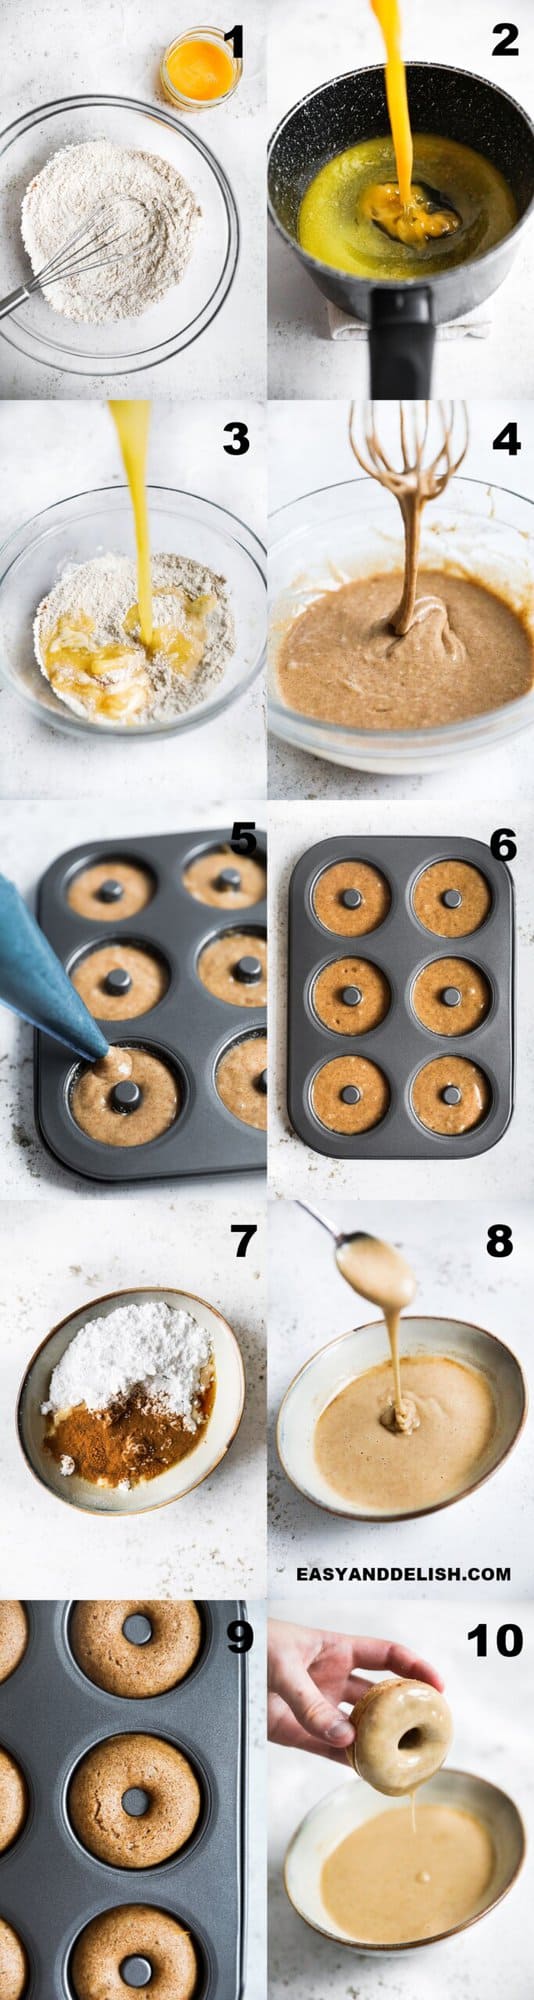 image collage showing the step by step of the recipe